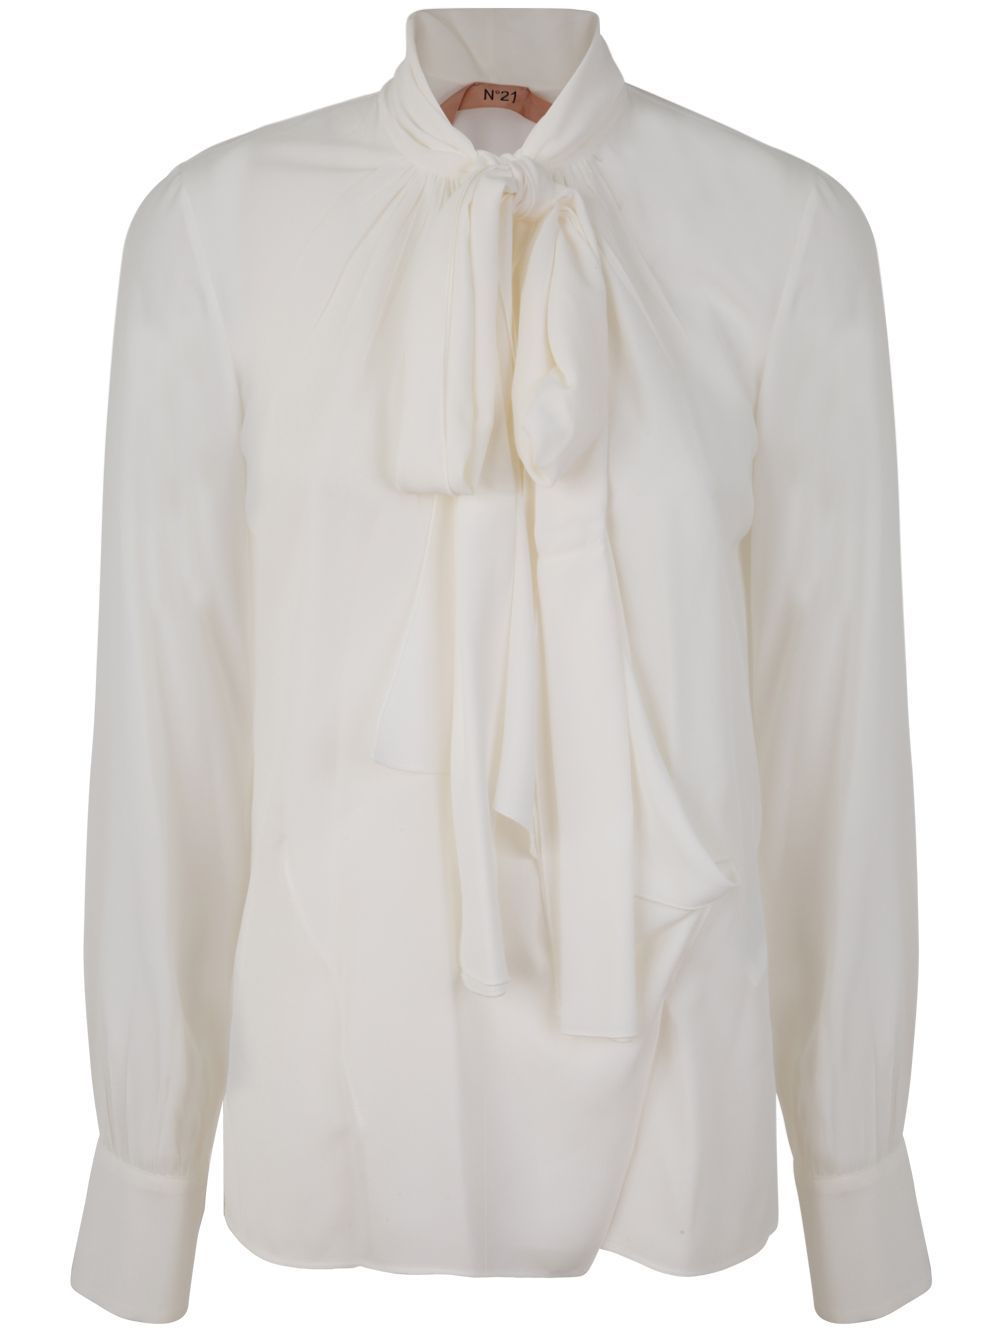 N°21 SHIRT WITH SCARF,G081.5111